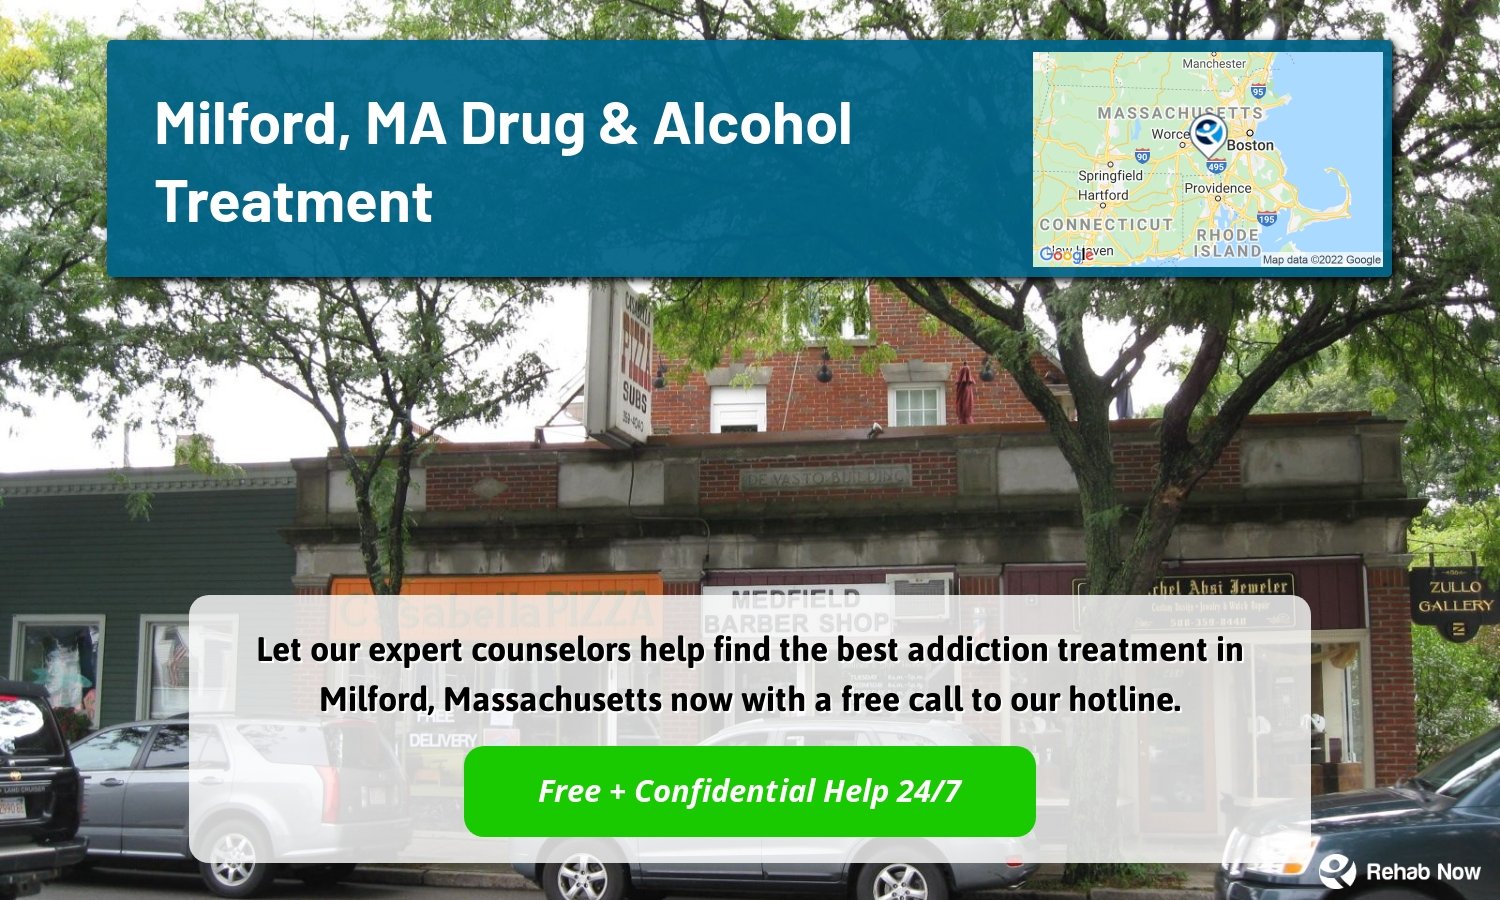 Let our expert counselors help find the best addiction treatment in Milford, Massachusetts now with a free call to our hotline.